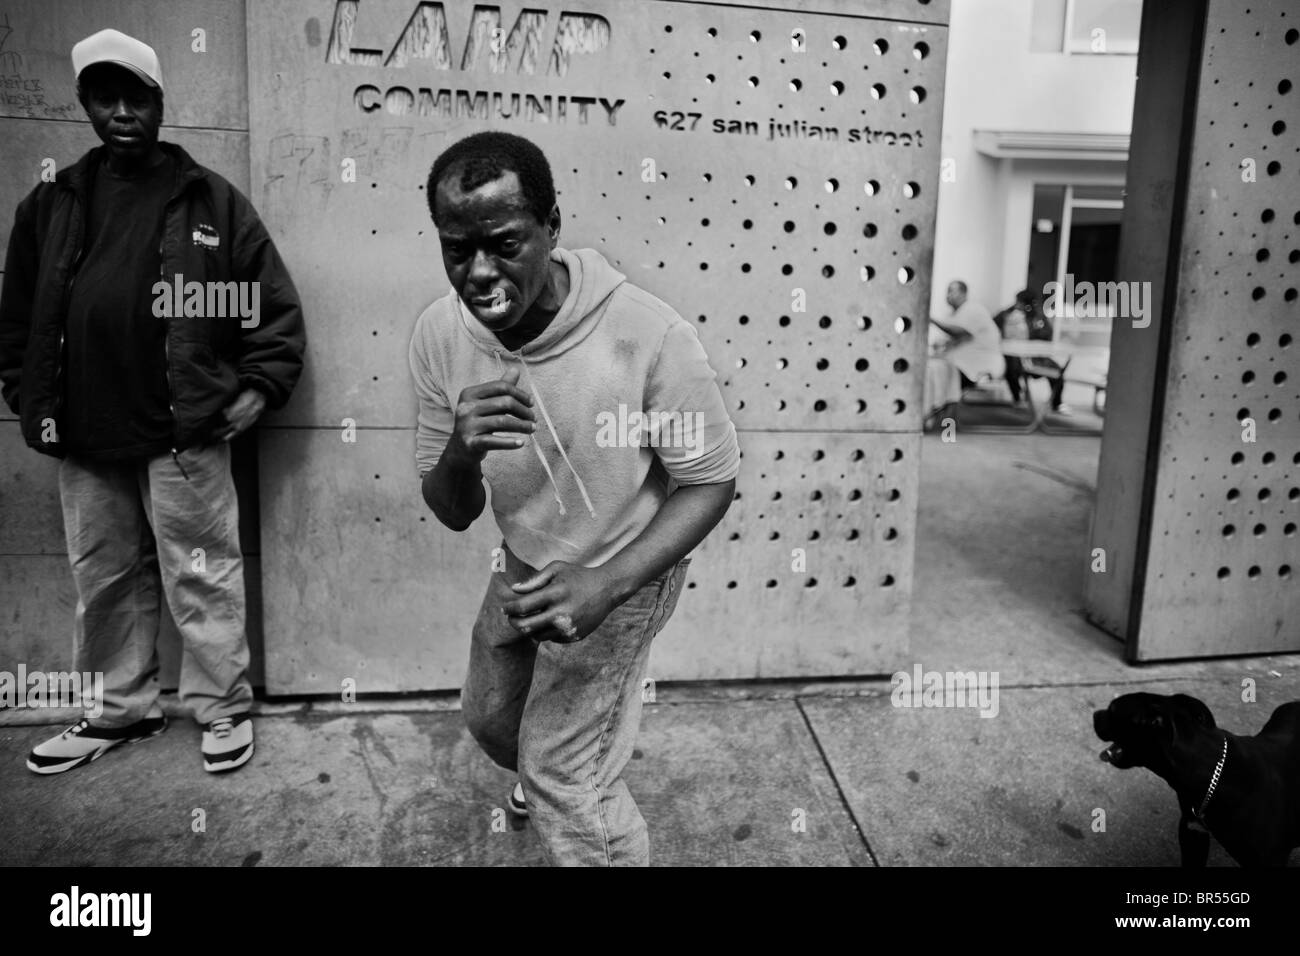 Homeless in the Skid Row area of Los Angeles California. Stock Photo